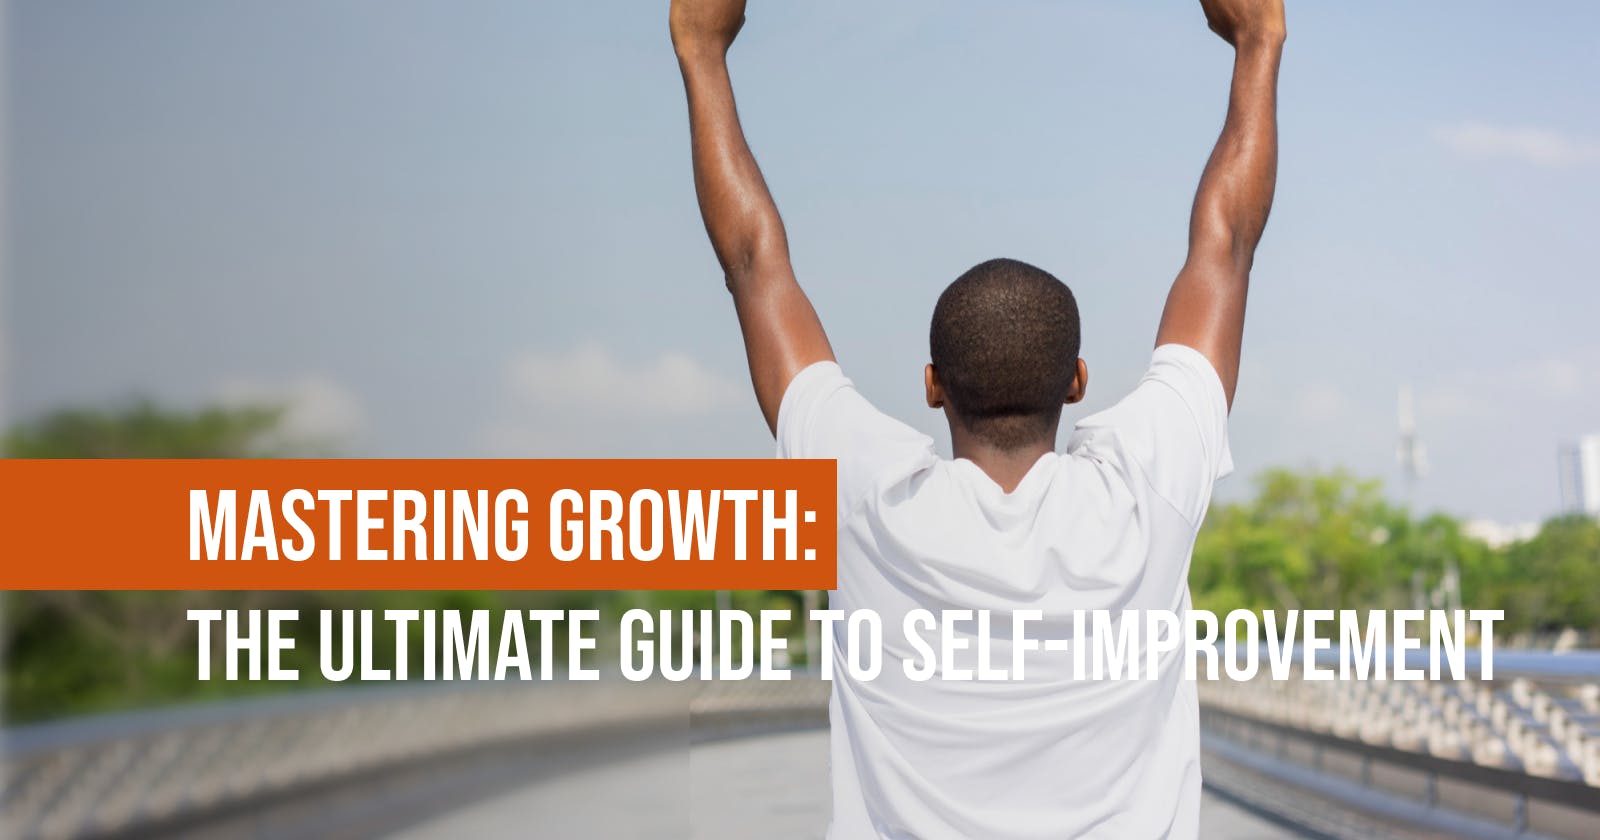 Mastering Growth: The Ultimate Guide to Self-Improvement